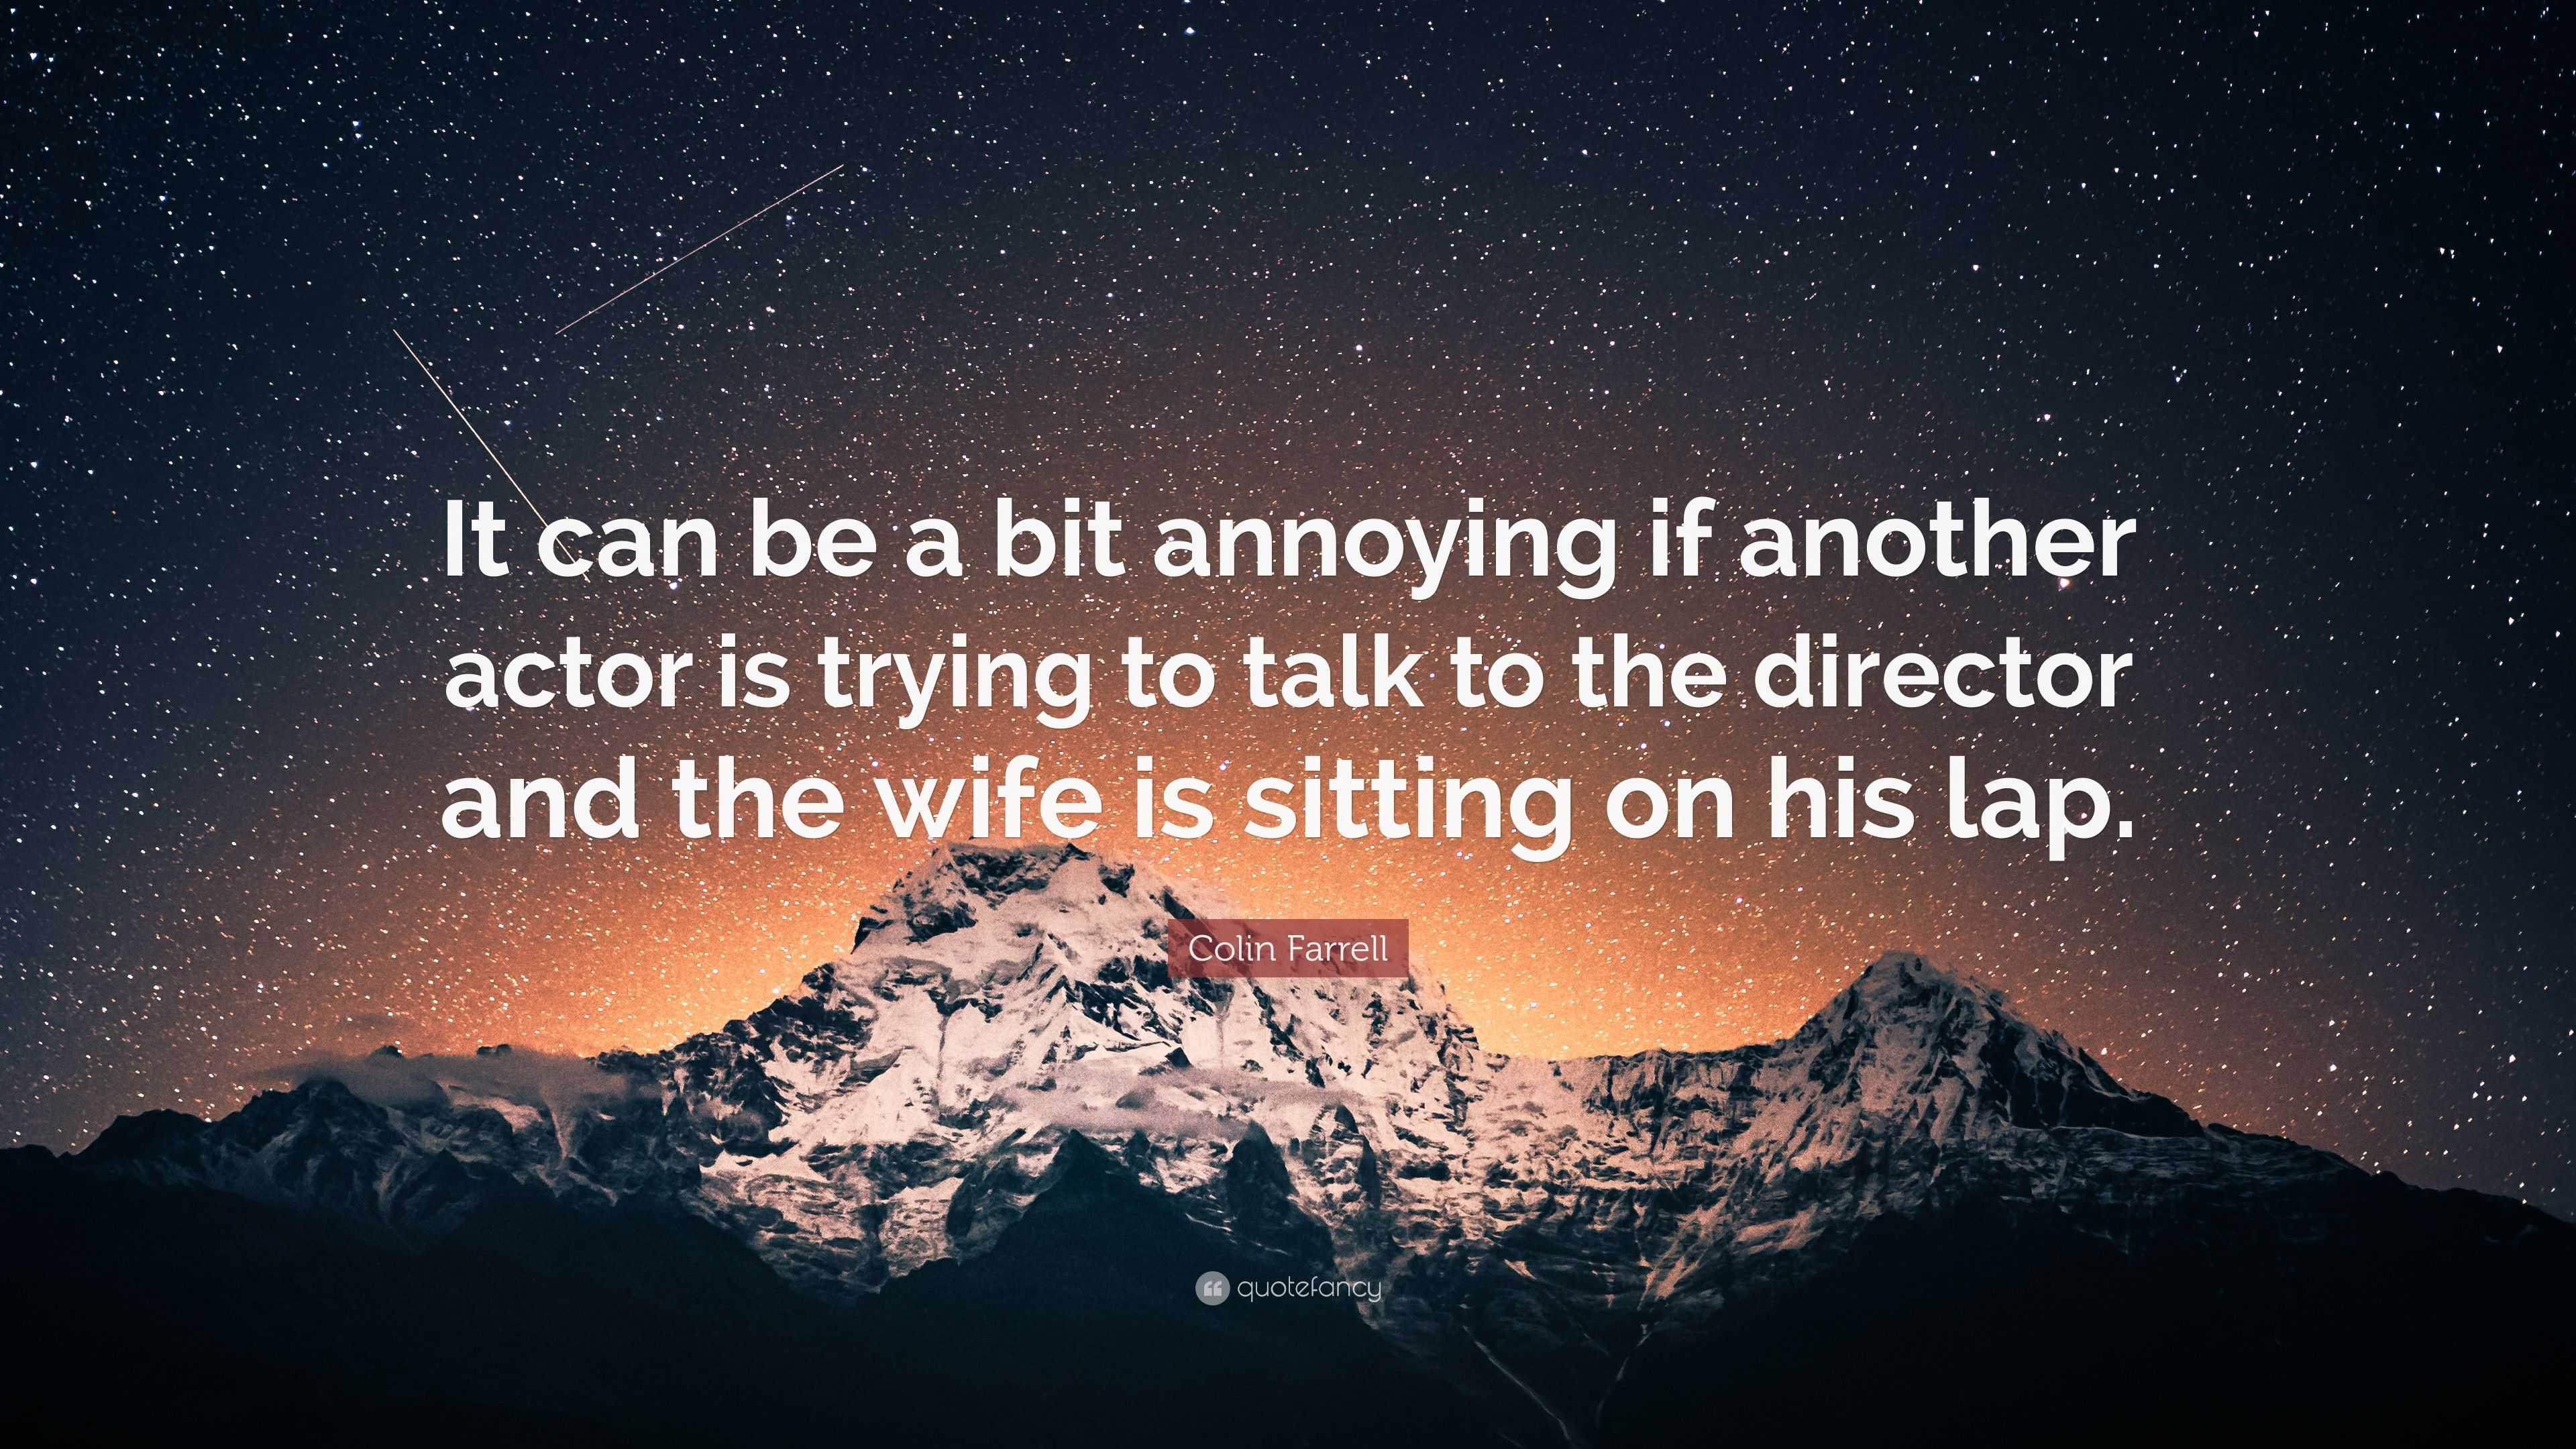 Colin Farrell Quote: “It can be a bit annoying if another actor is